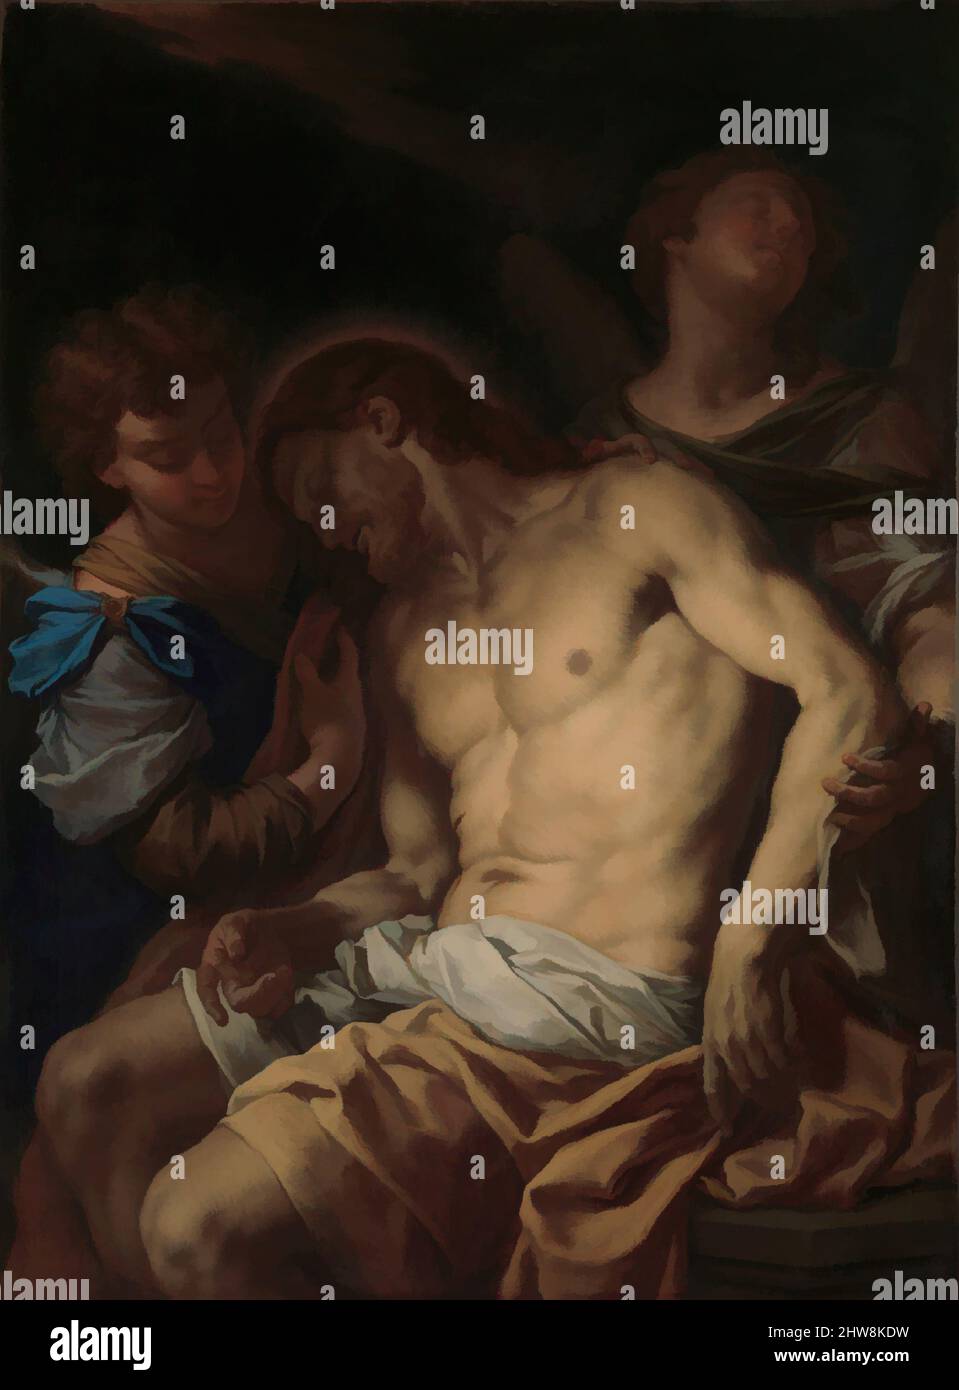 Art inspired by Dead Christ Supported by Angels, ca. 1710, Oil on canvas, 51 1/2 x 38 1/4 in. (130.8 x 97.2 cm), Paintings, Francesco Trevisani (Italian, Capodistria 1656–1746 Rome), Trevisani, of Venetian origins, spent most of his life in Rome, working for the papal court. He, Classic works modernized by Artotop with a splash of modernity. Shapes, color and value, eye-catching visual impact on art. Emotions through freedom of artworks in a contemporary way. A timeless message pursuing a wildly creative new direction. Artists turning to the digital medium and creating the Artotop NFT Stock Photo